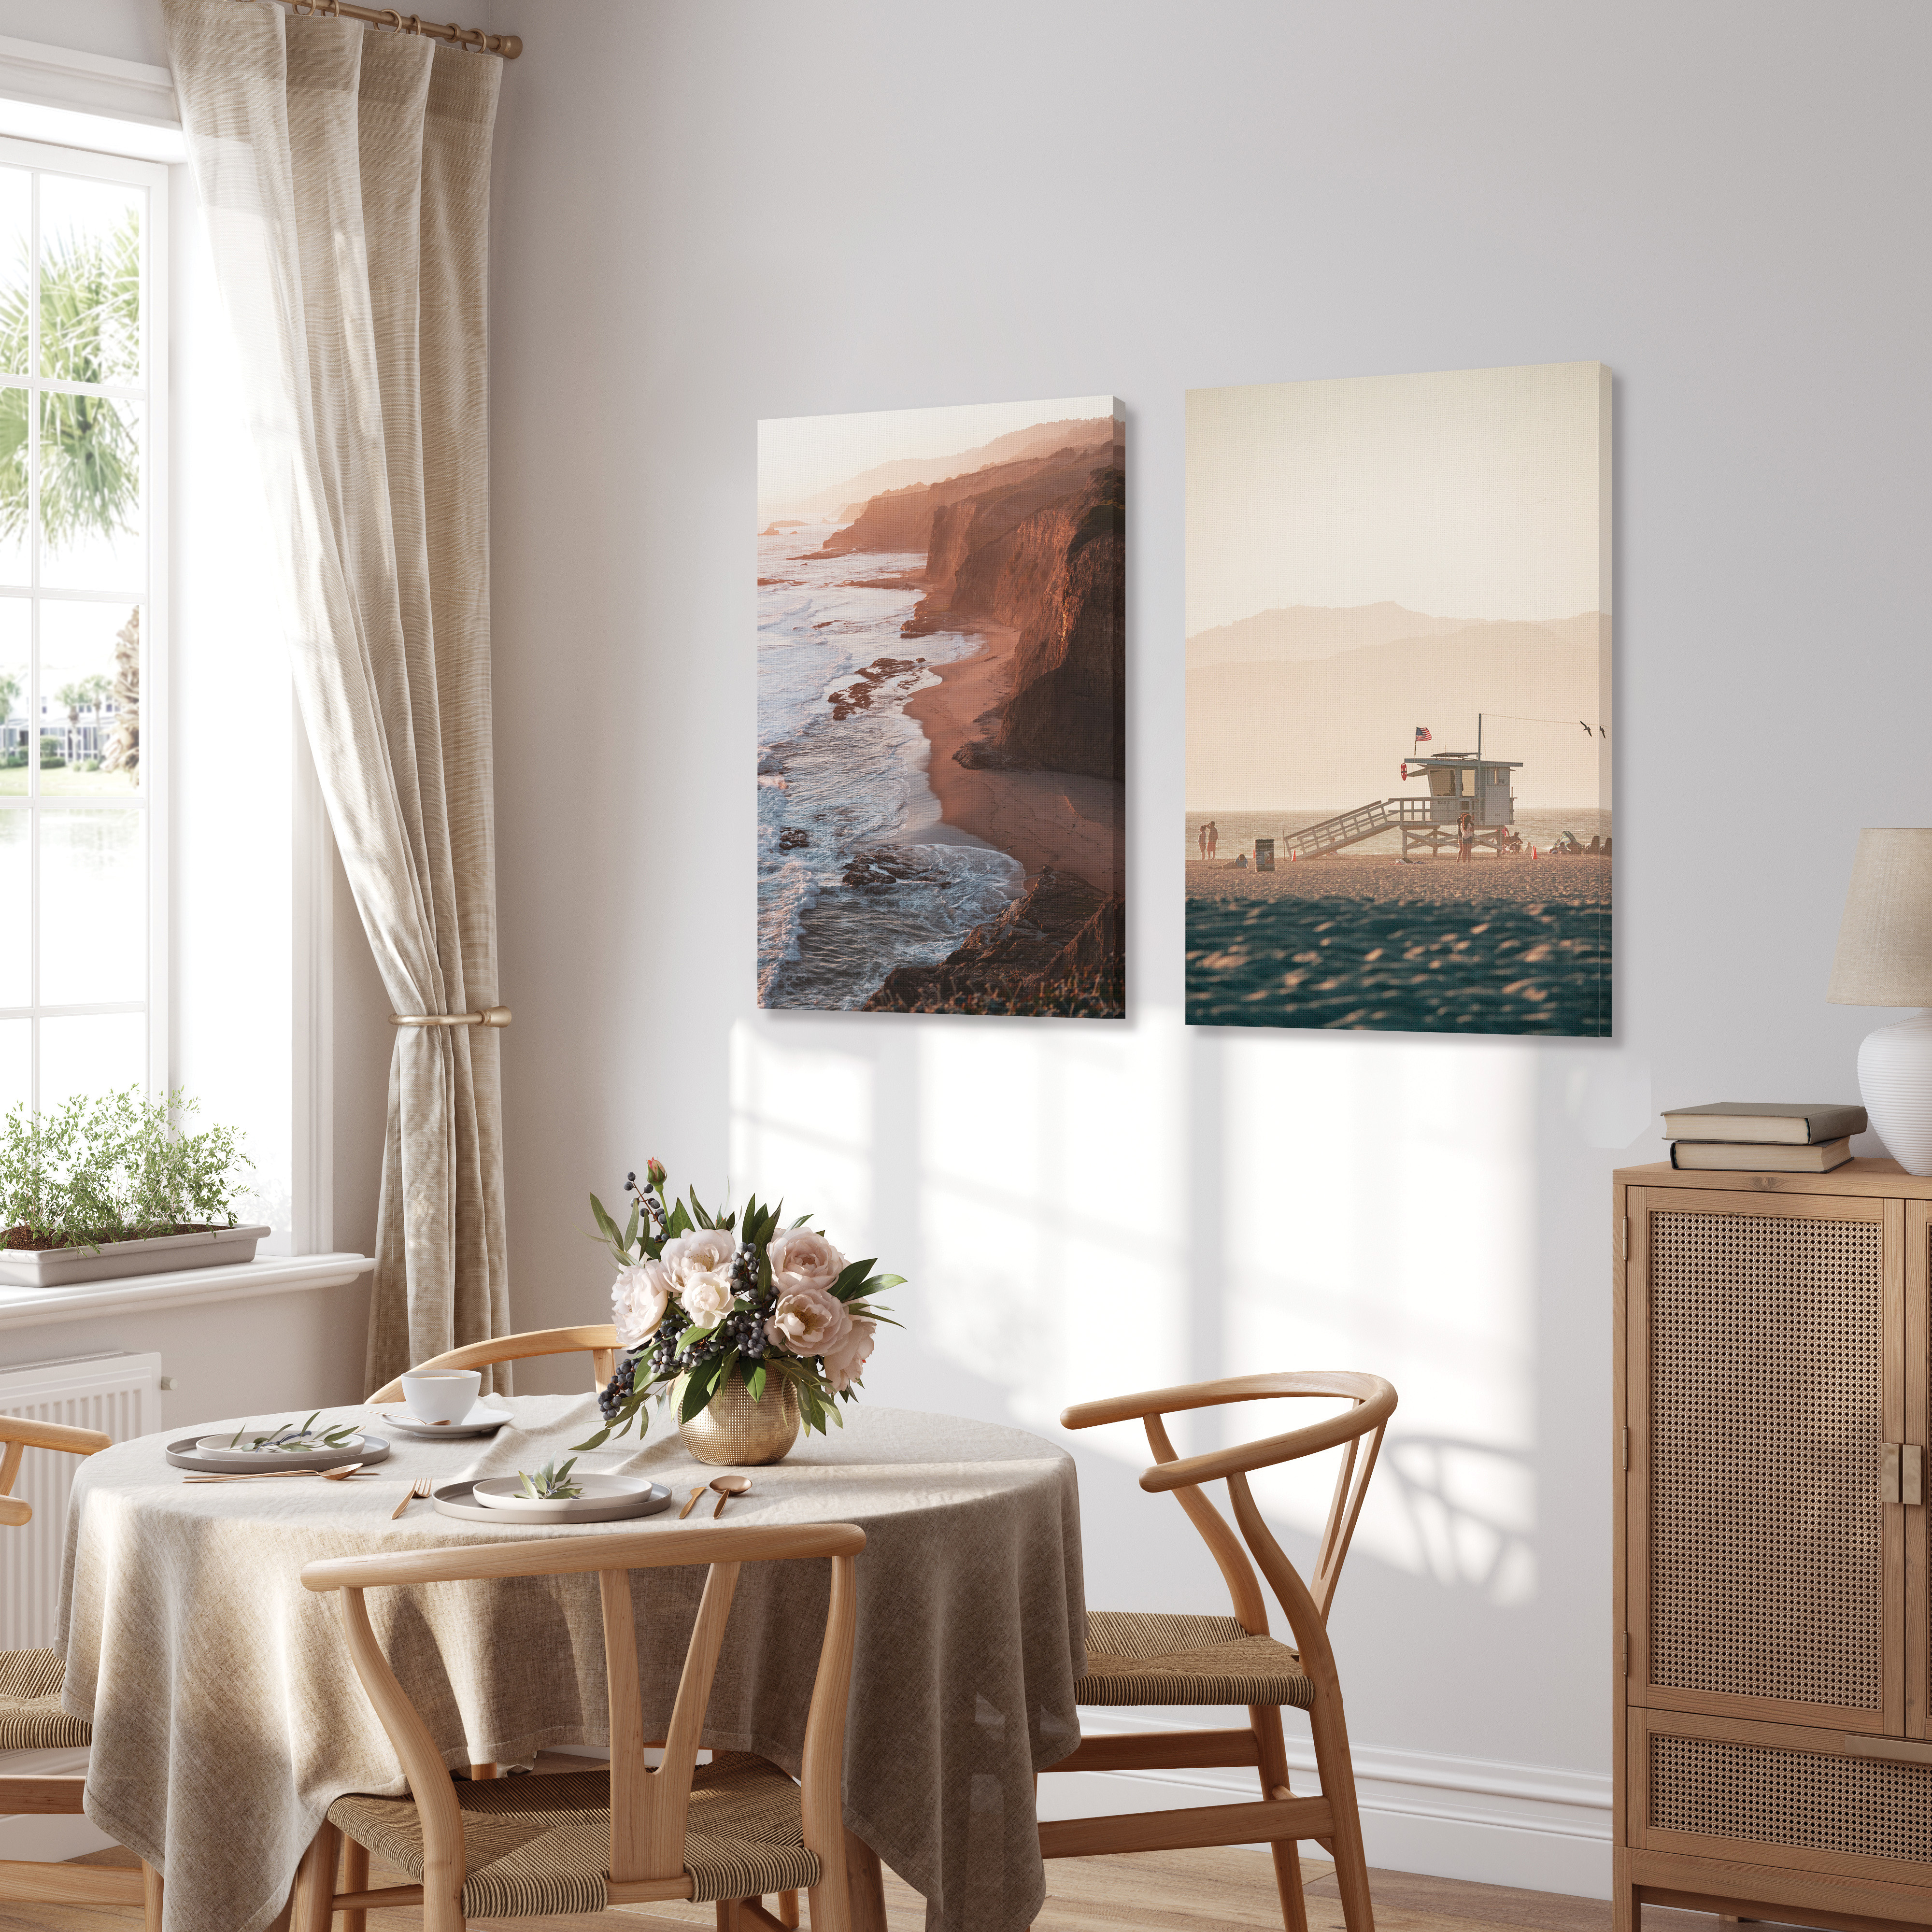 Canvas prints of various landscape shots in dining room